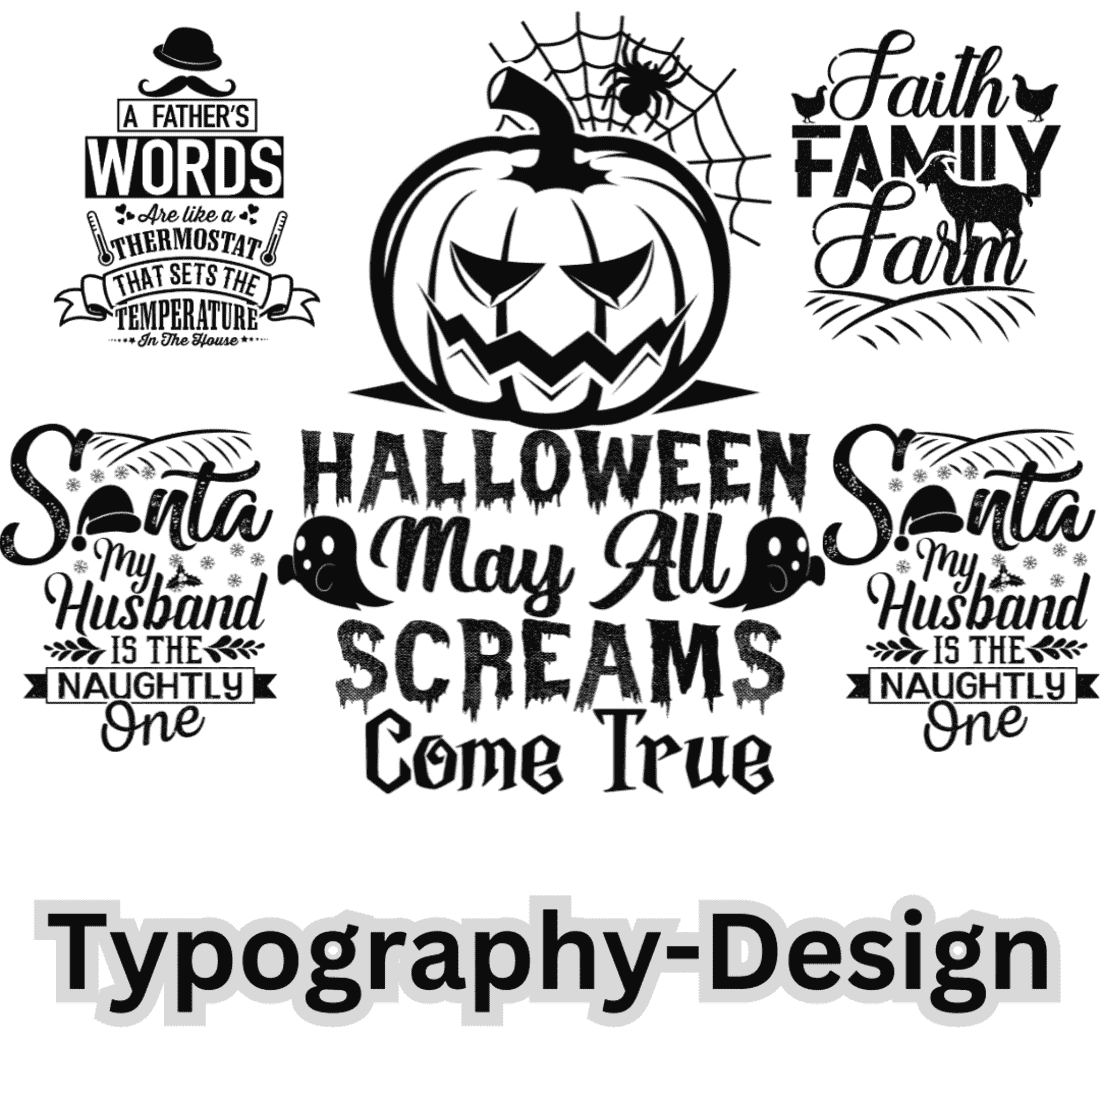 Typography-Design 90%OFF cover image.